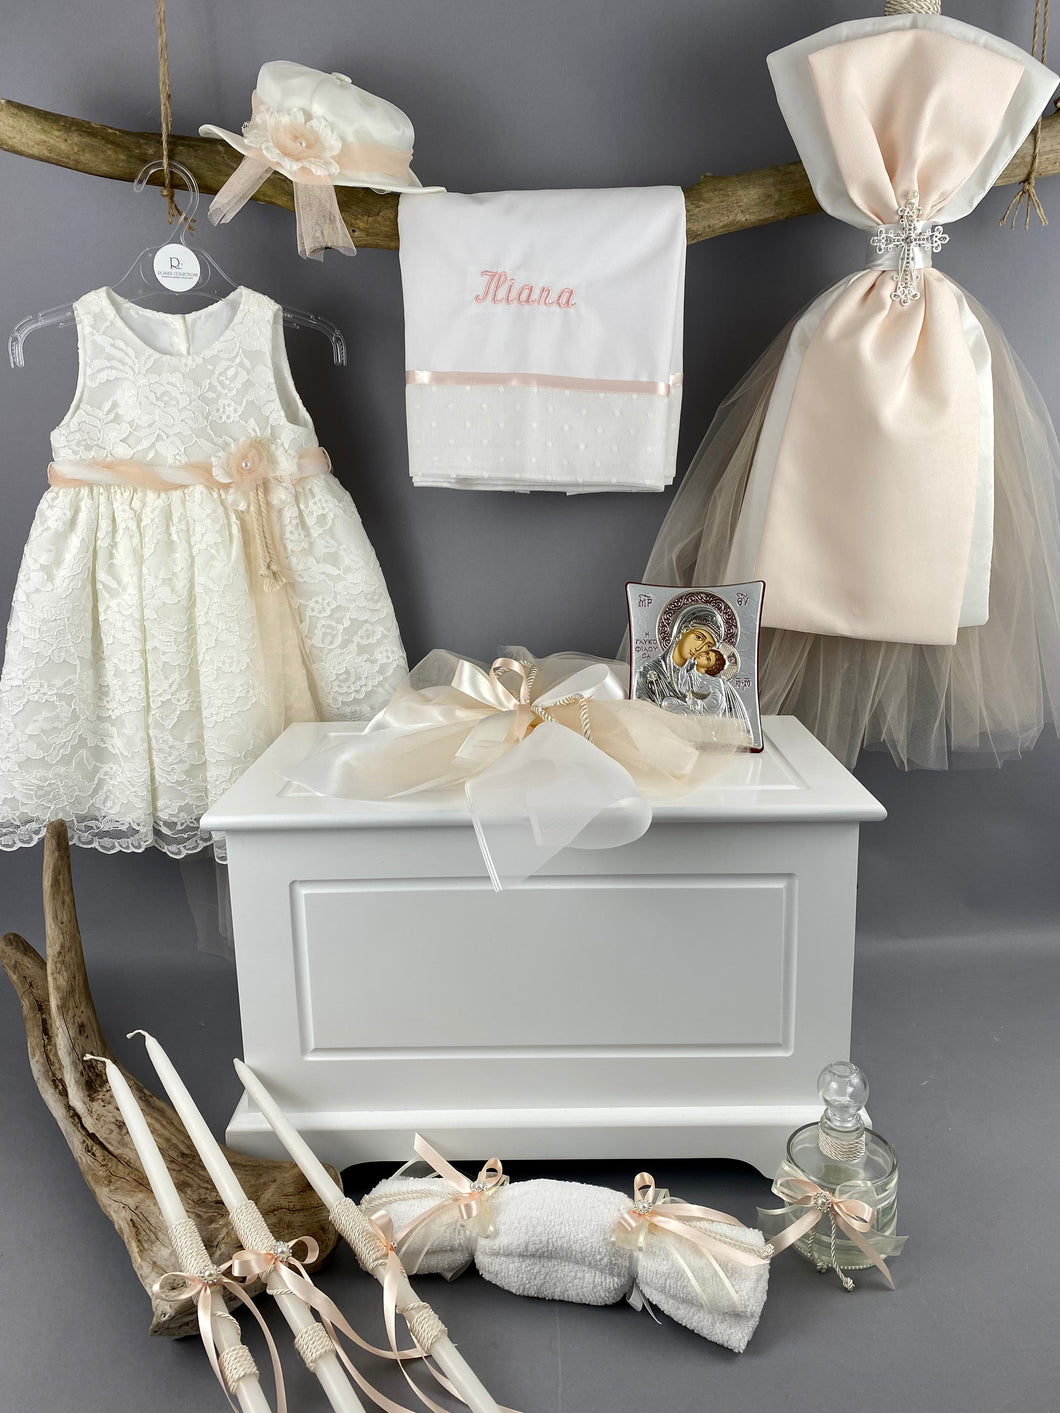 Baptism Package Lace Dress, Triantos Gold Cross, Treasure Chest GBP4